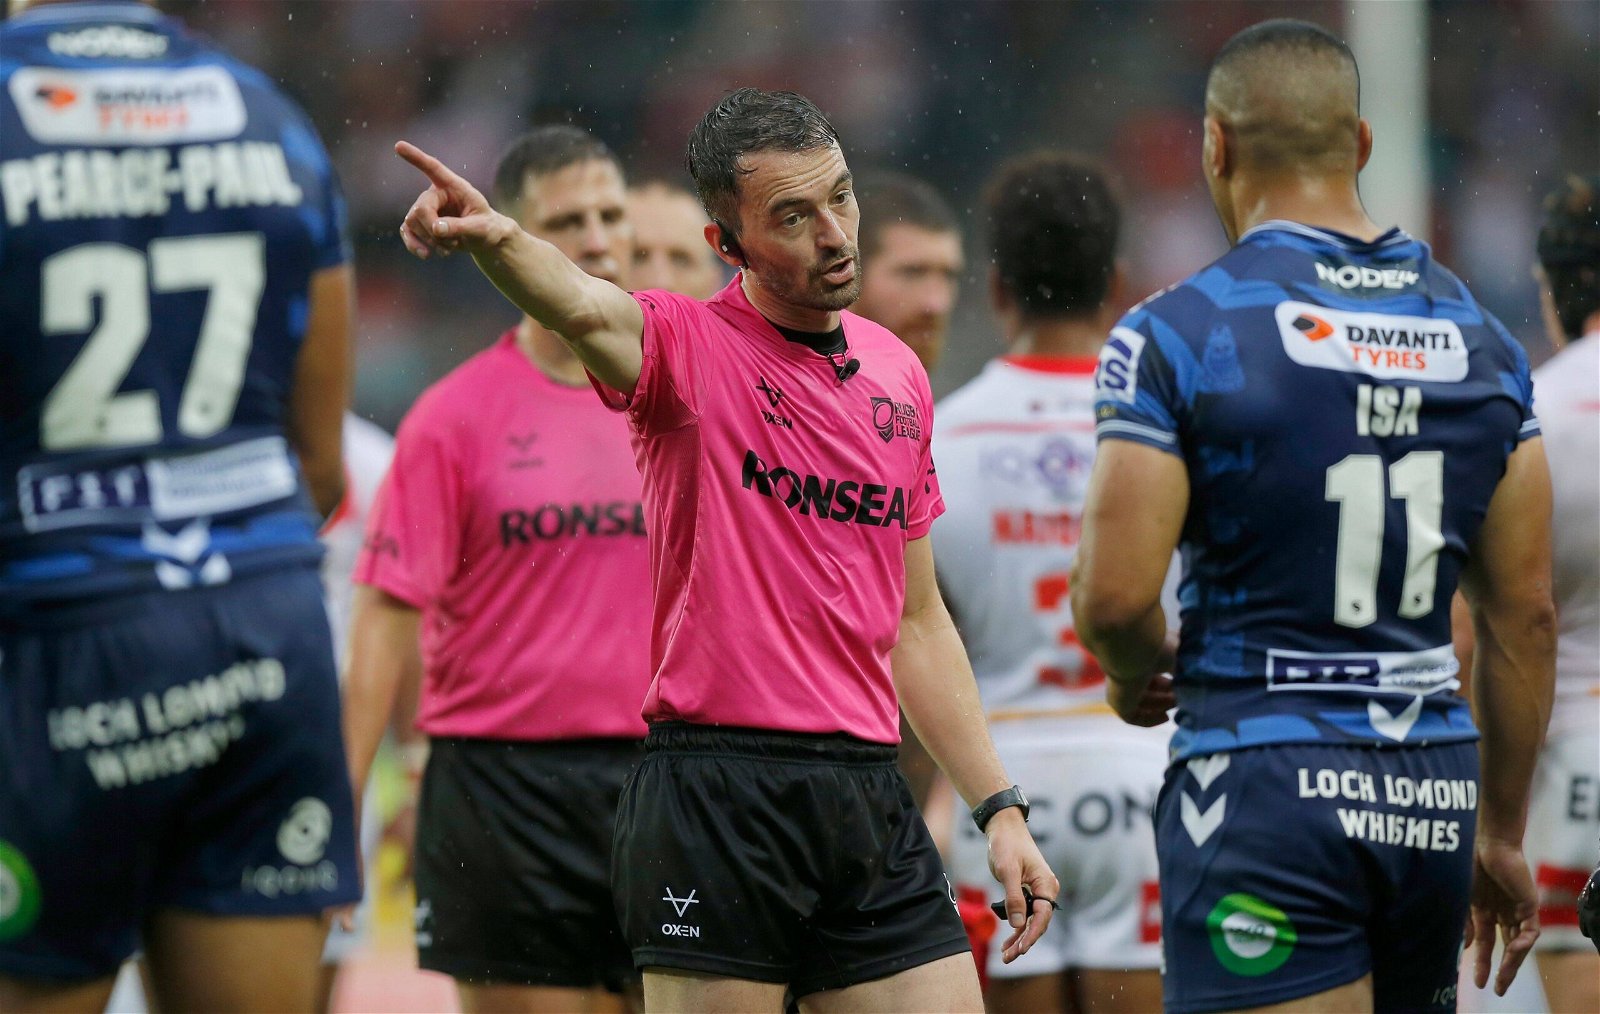 James Child, wearing pink referee's kit, makes a decision.